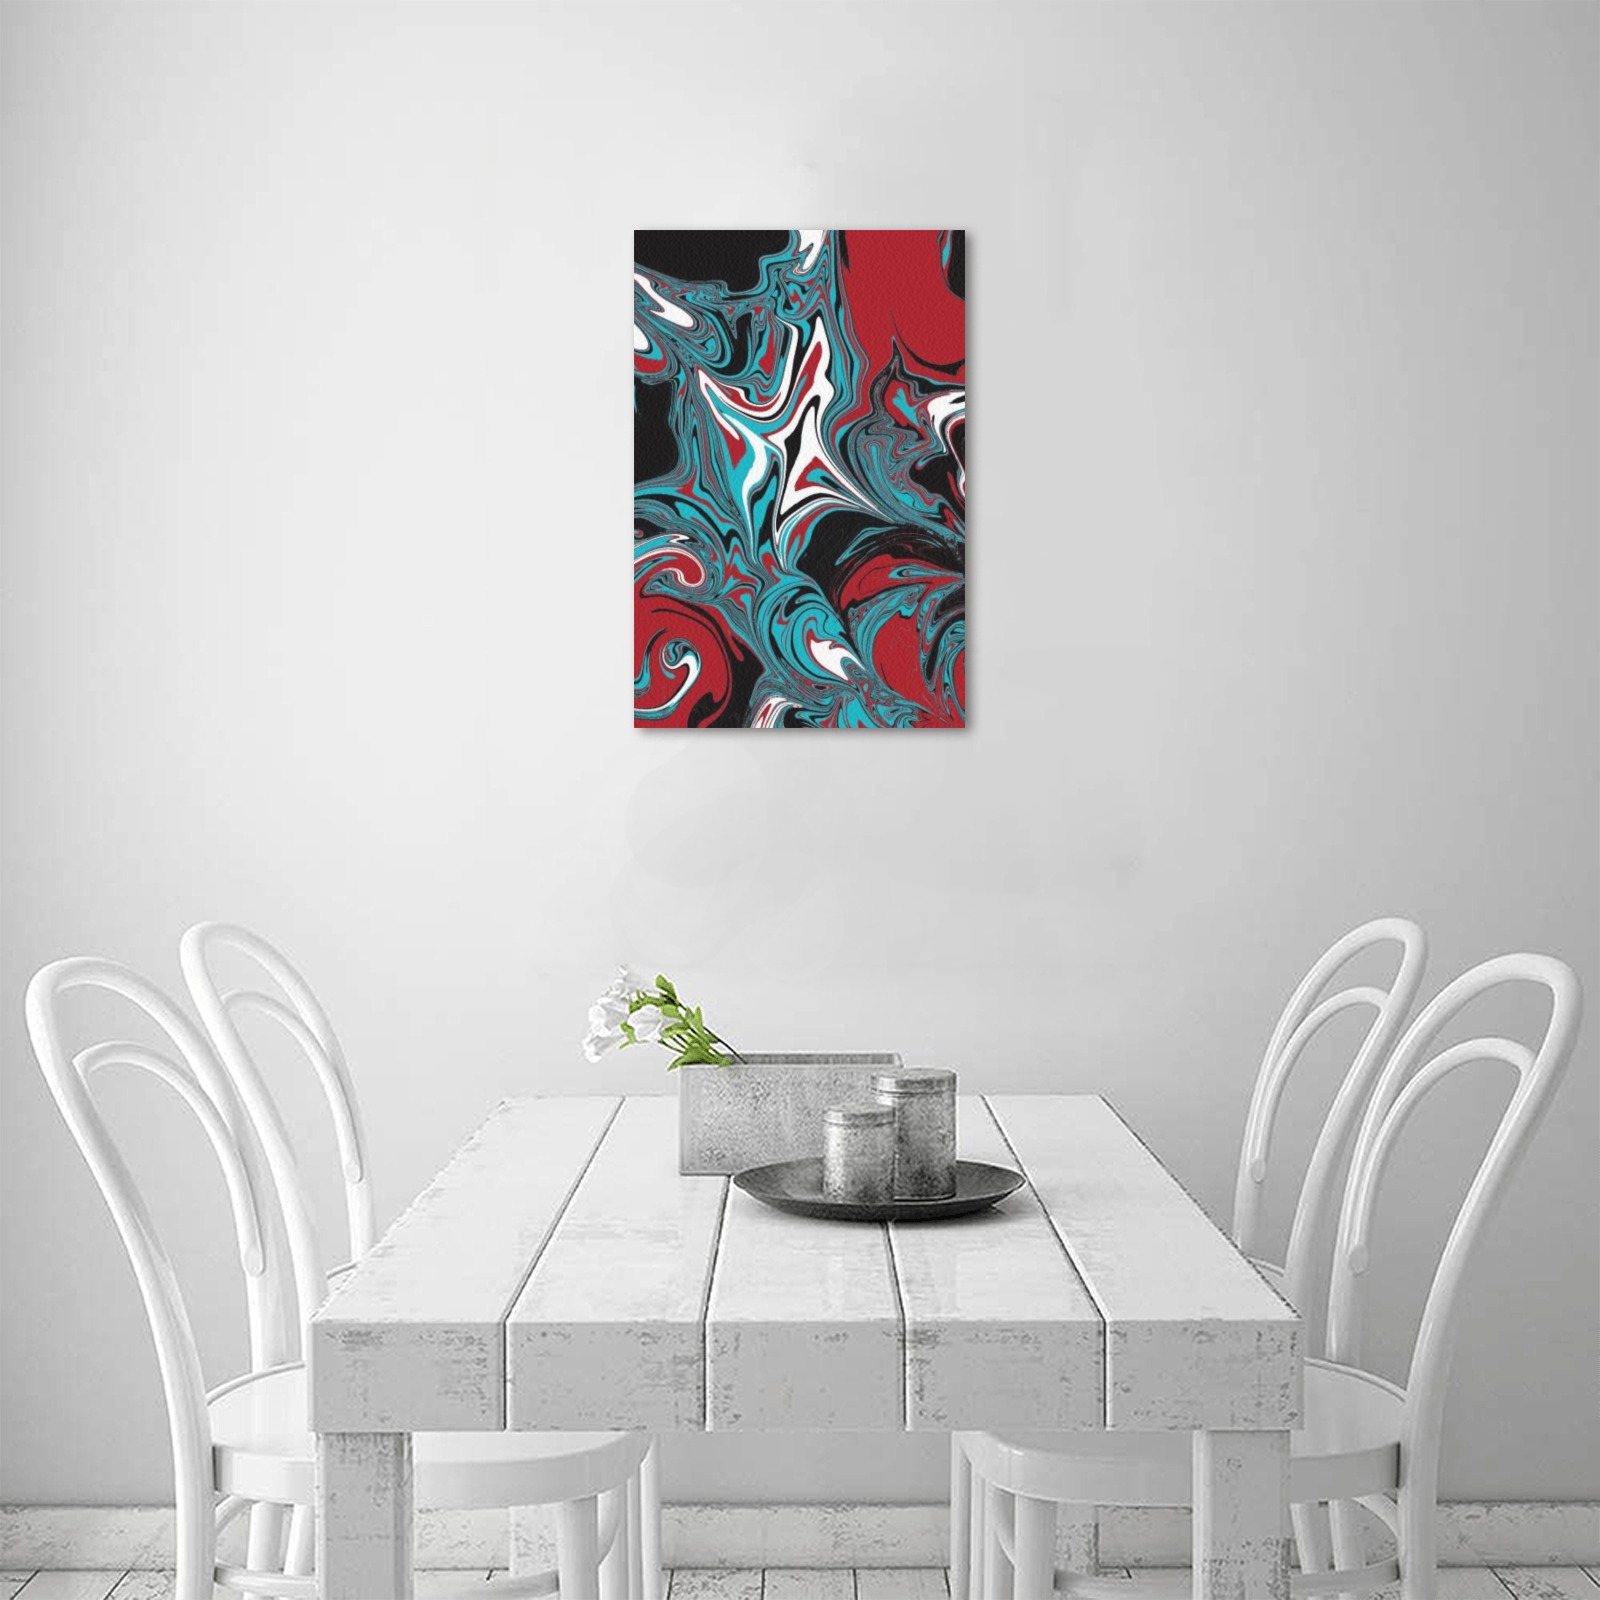 Dark Wave of Colors Frame Canvas Print 12"x18"